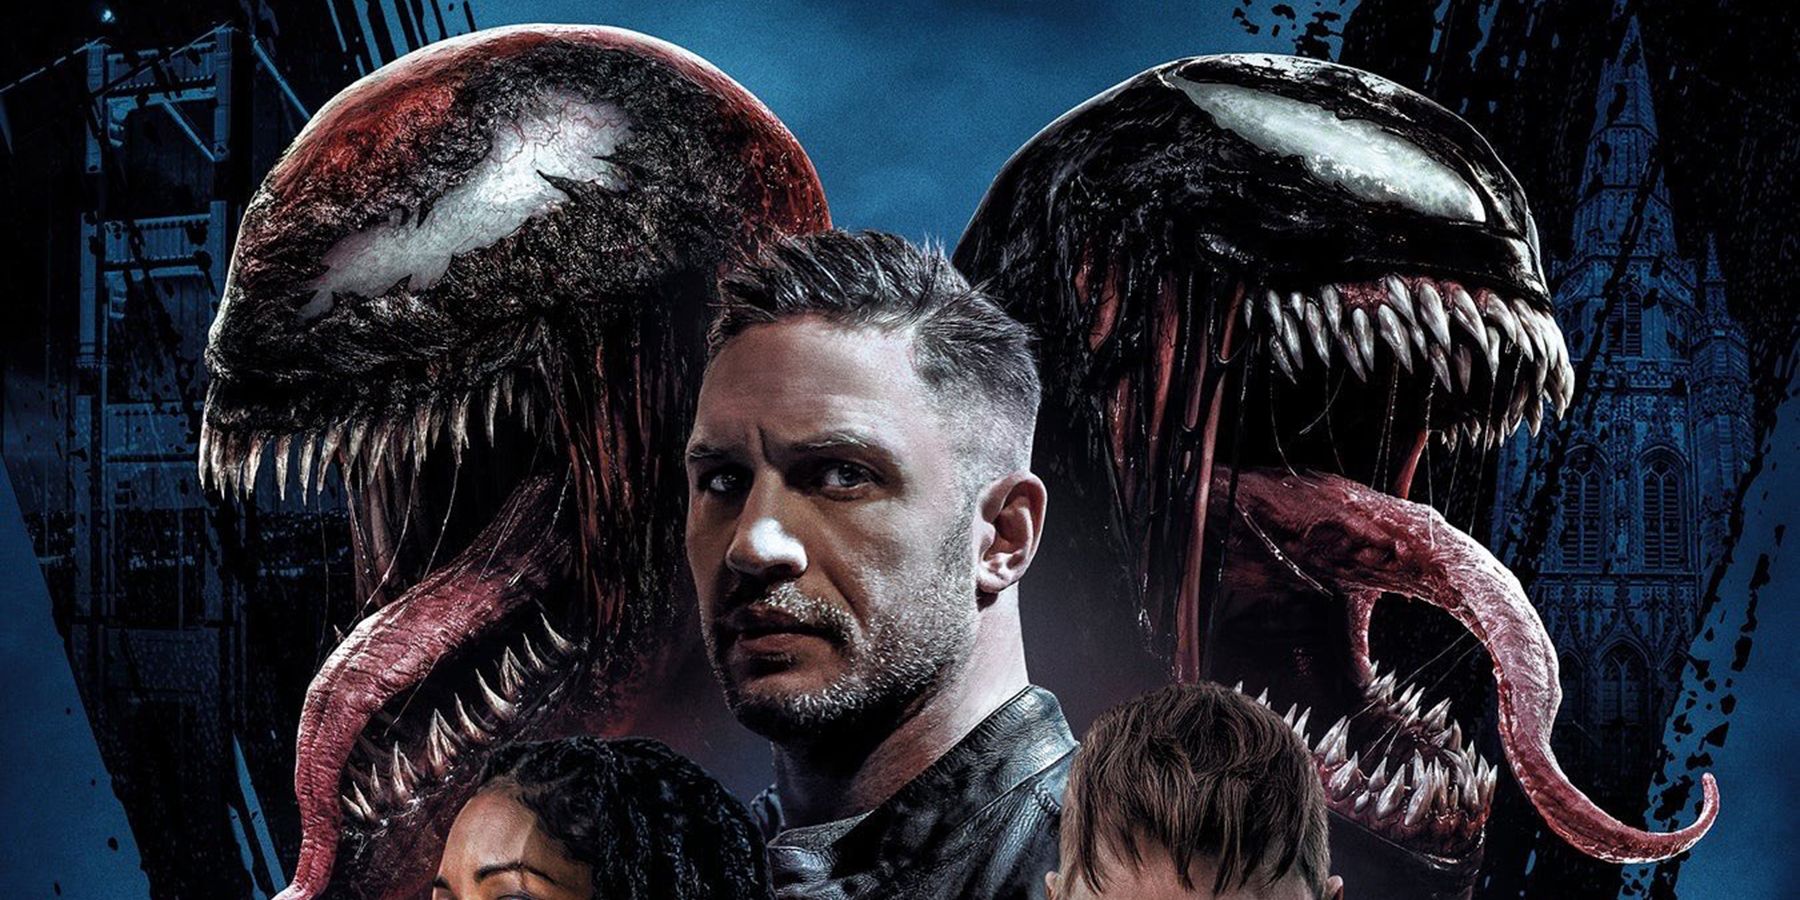 Venom: Let There Be Carnage Review